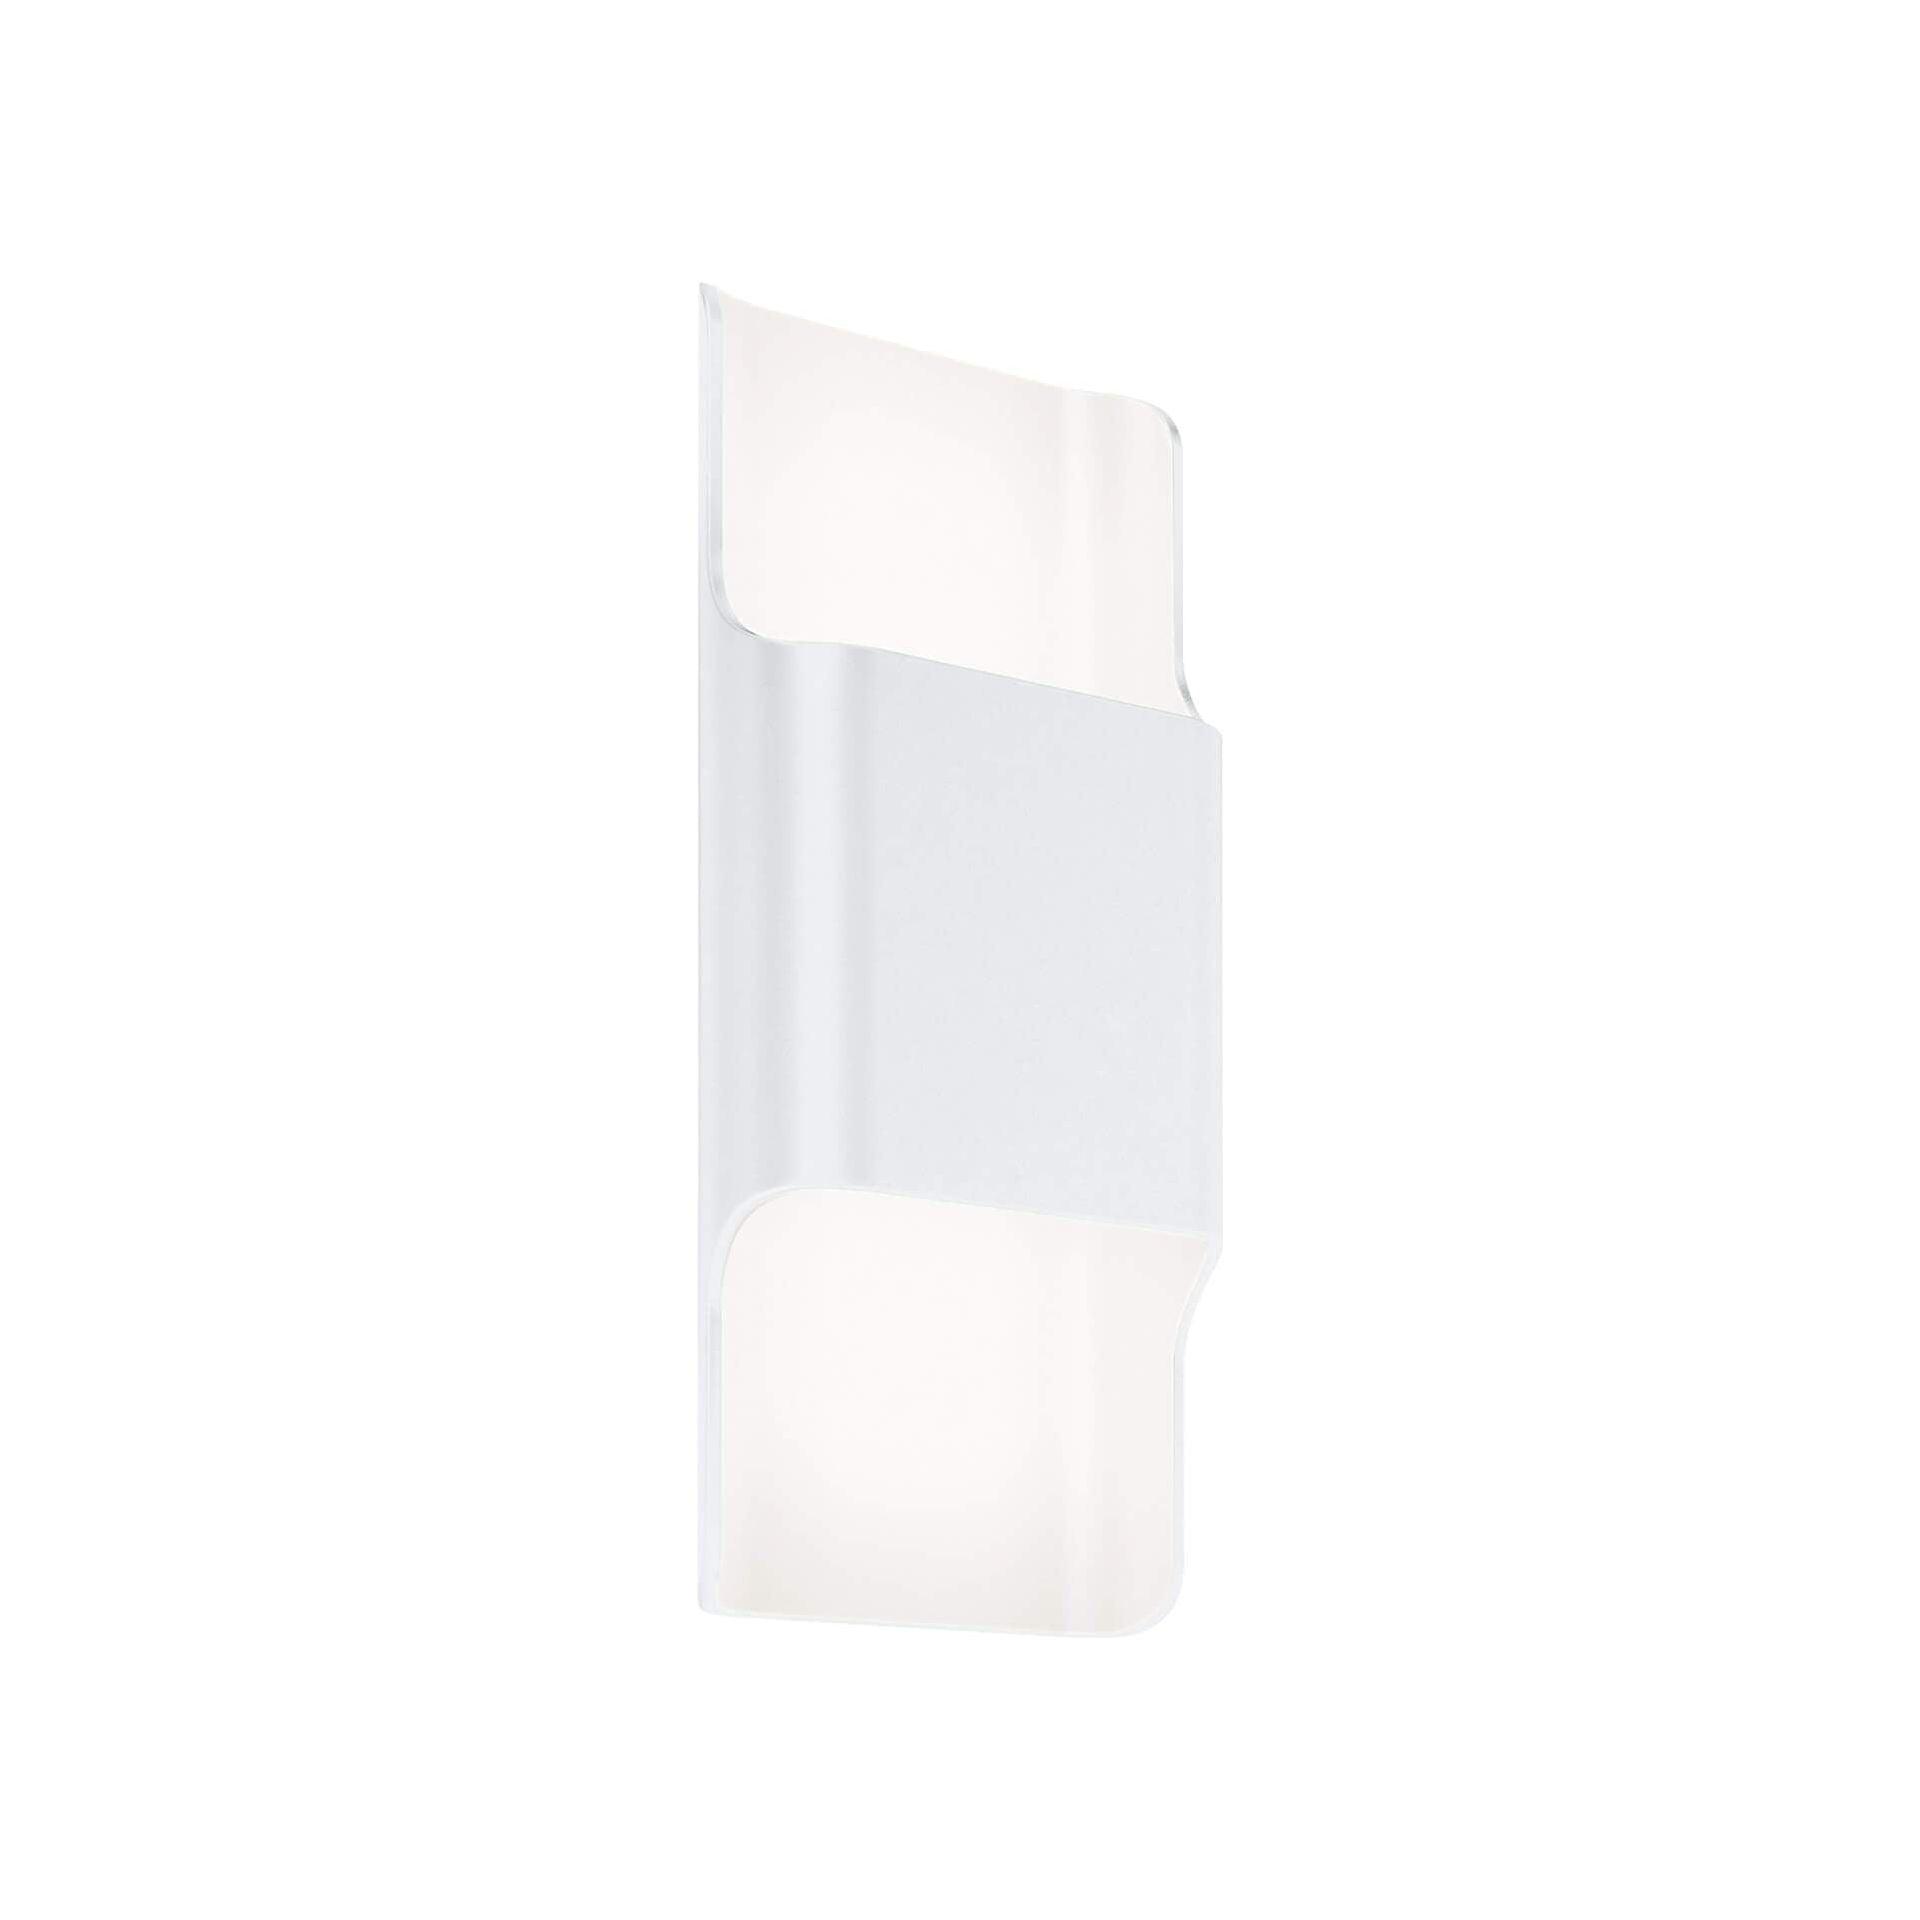 DALS - Led Wall Sconce - Lights Canada